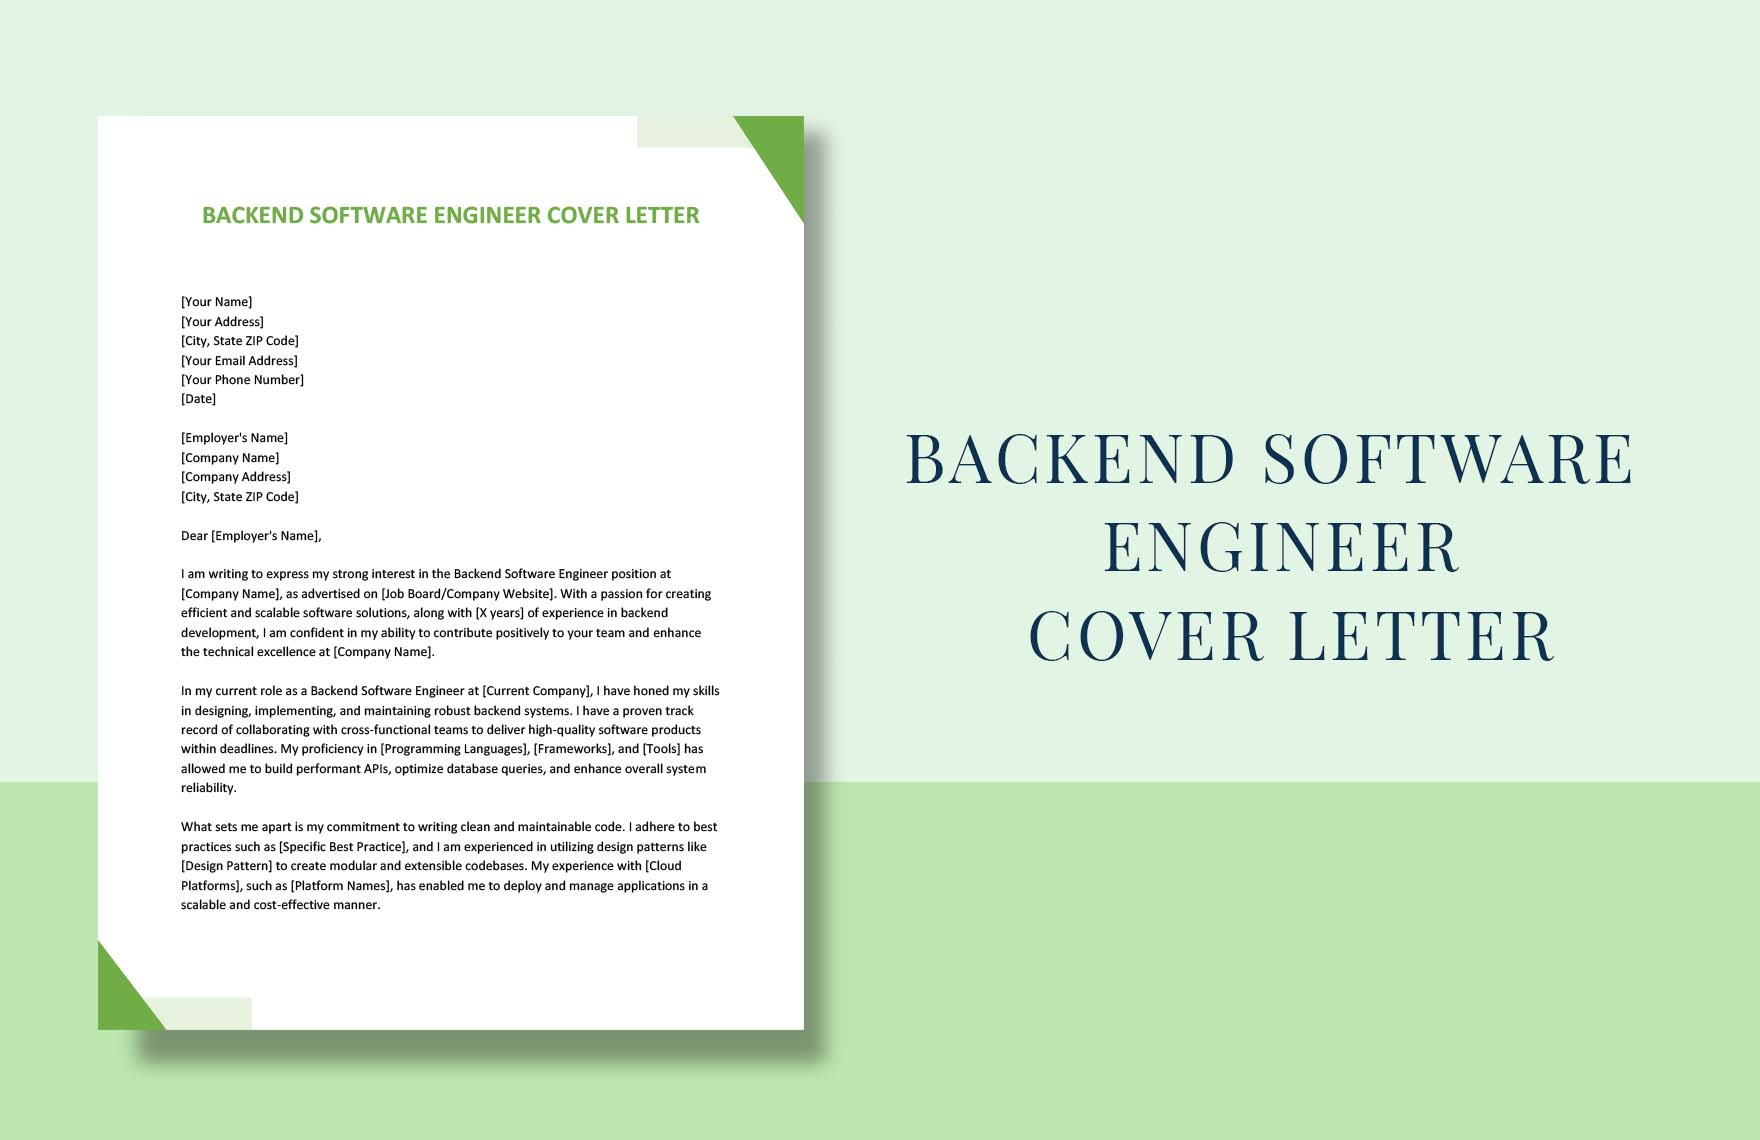 Backend Software Engineer Cover Letter